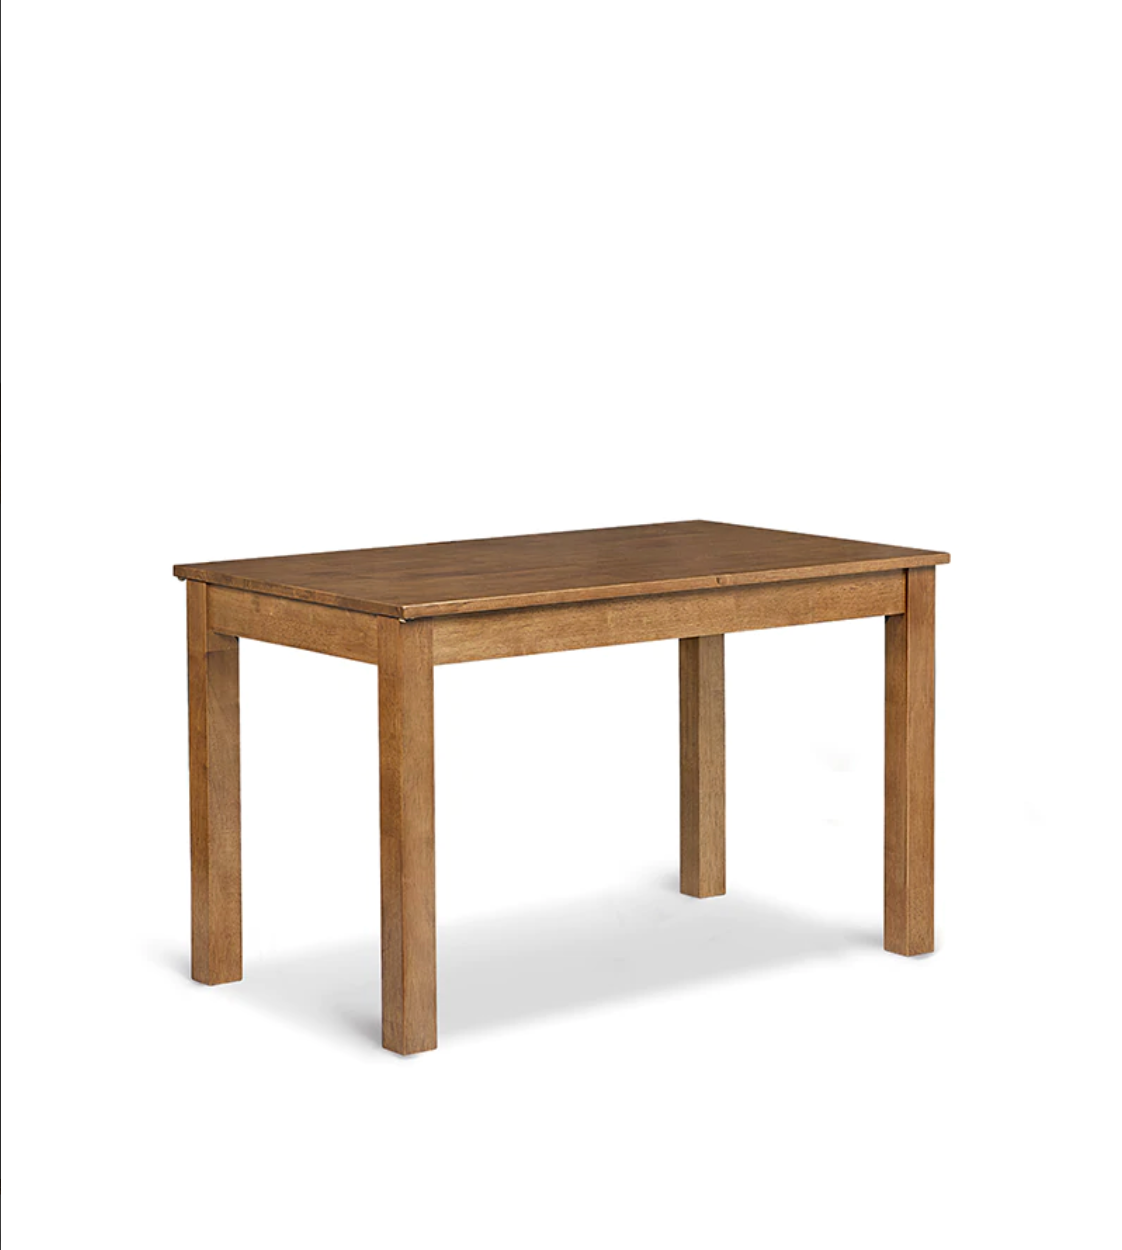 VARIETY Extendable Dining Table 02 實木伸縮枱